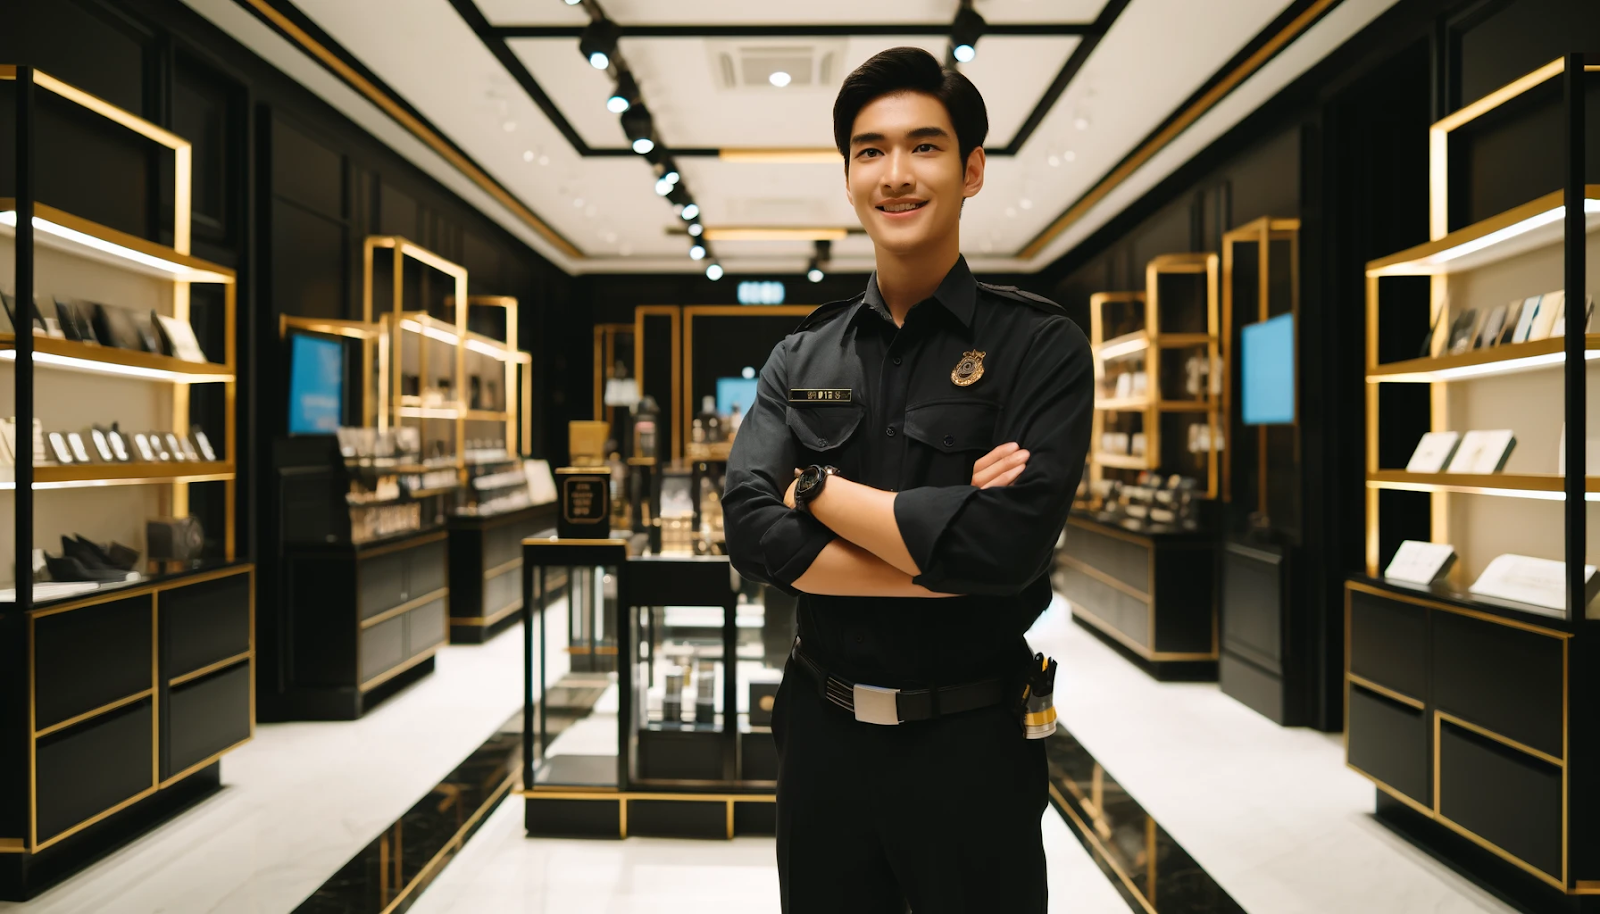 A cheerful security guard stands watchfully inside a well-lit retail store with black and gold accents visible.